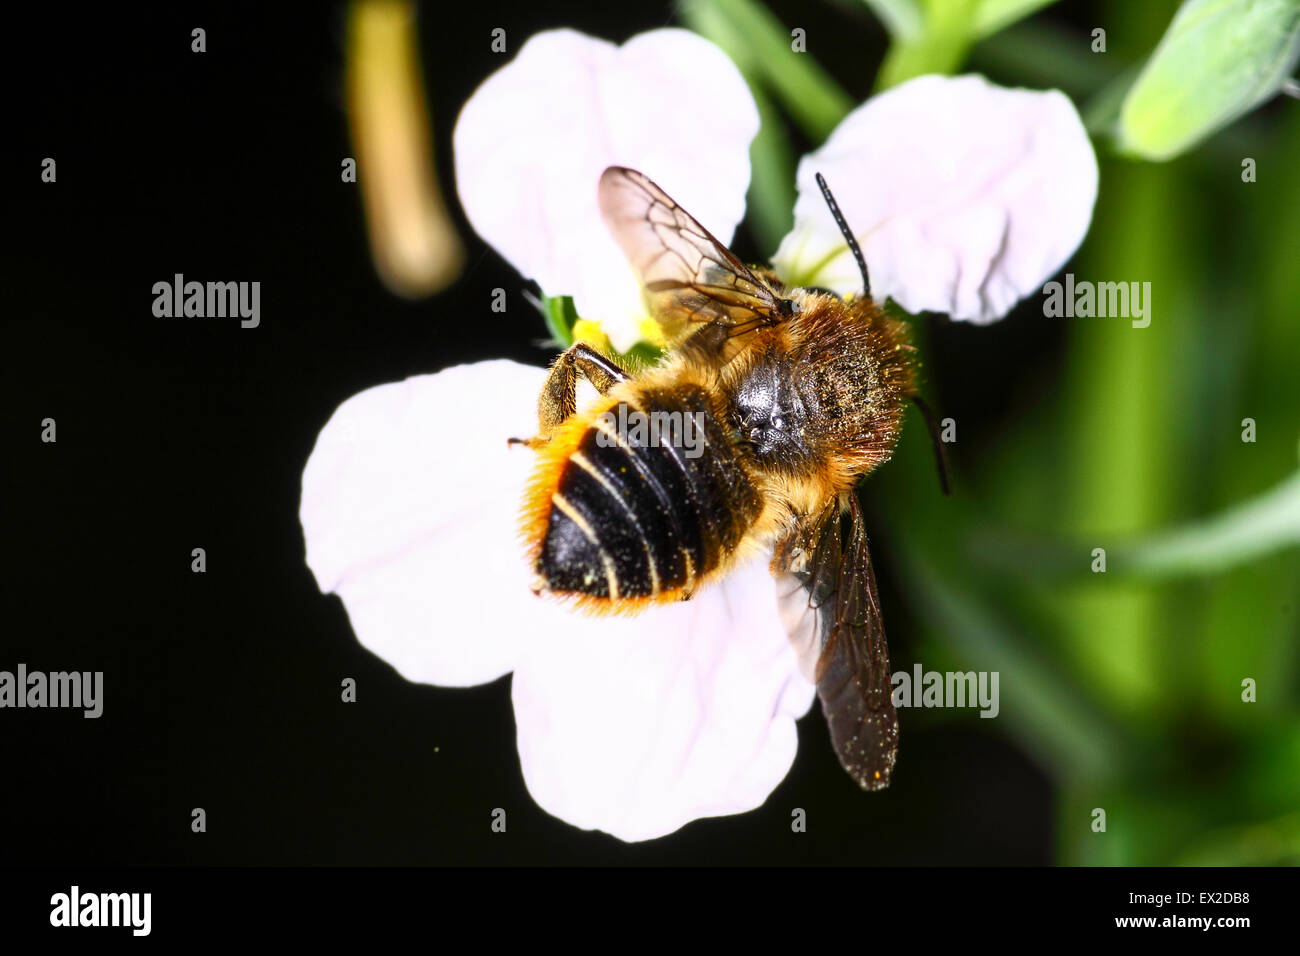 Leeds, Yorkshire, UK. 5th July, 2015. With bright sunny spells in Yorkshire the insects have been having a busy afternoon. This bee was busy pollinating a radish plant flower. Taken on the 5th July 2015 in Leeds, West Yorkshire. Credit:  Andrew Gardner/Alamy Live News Stock Photo